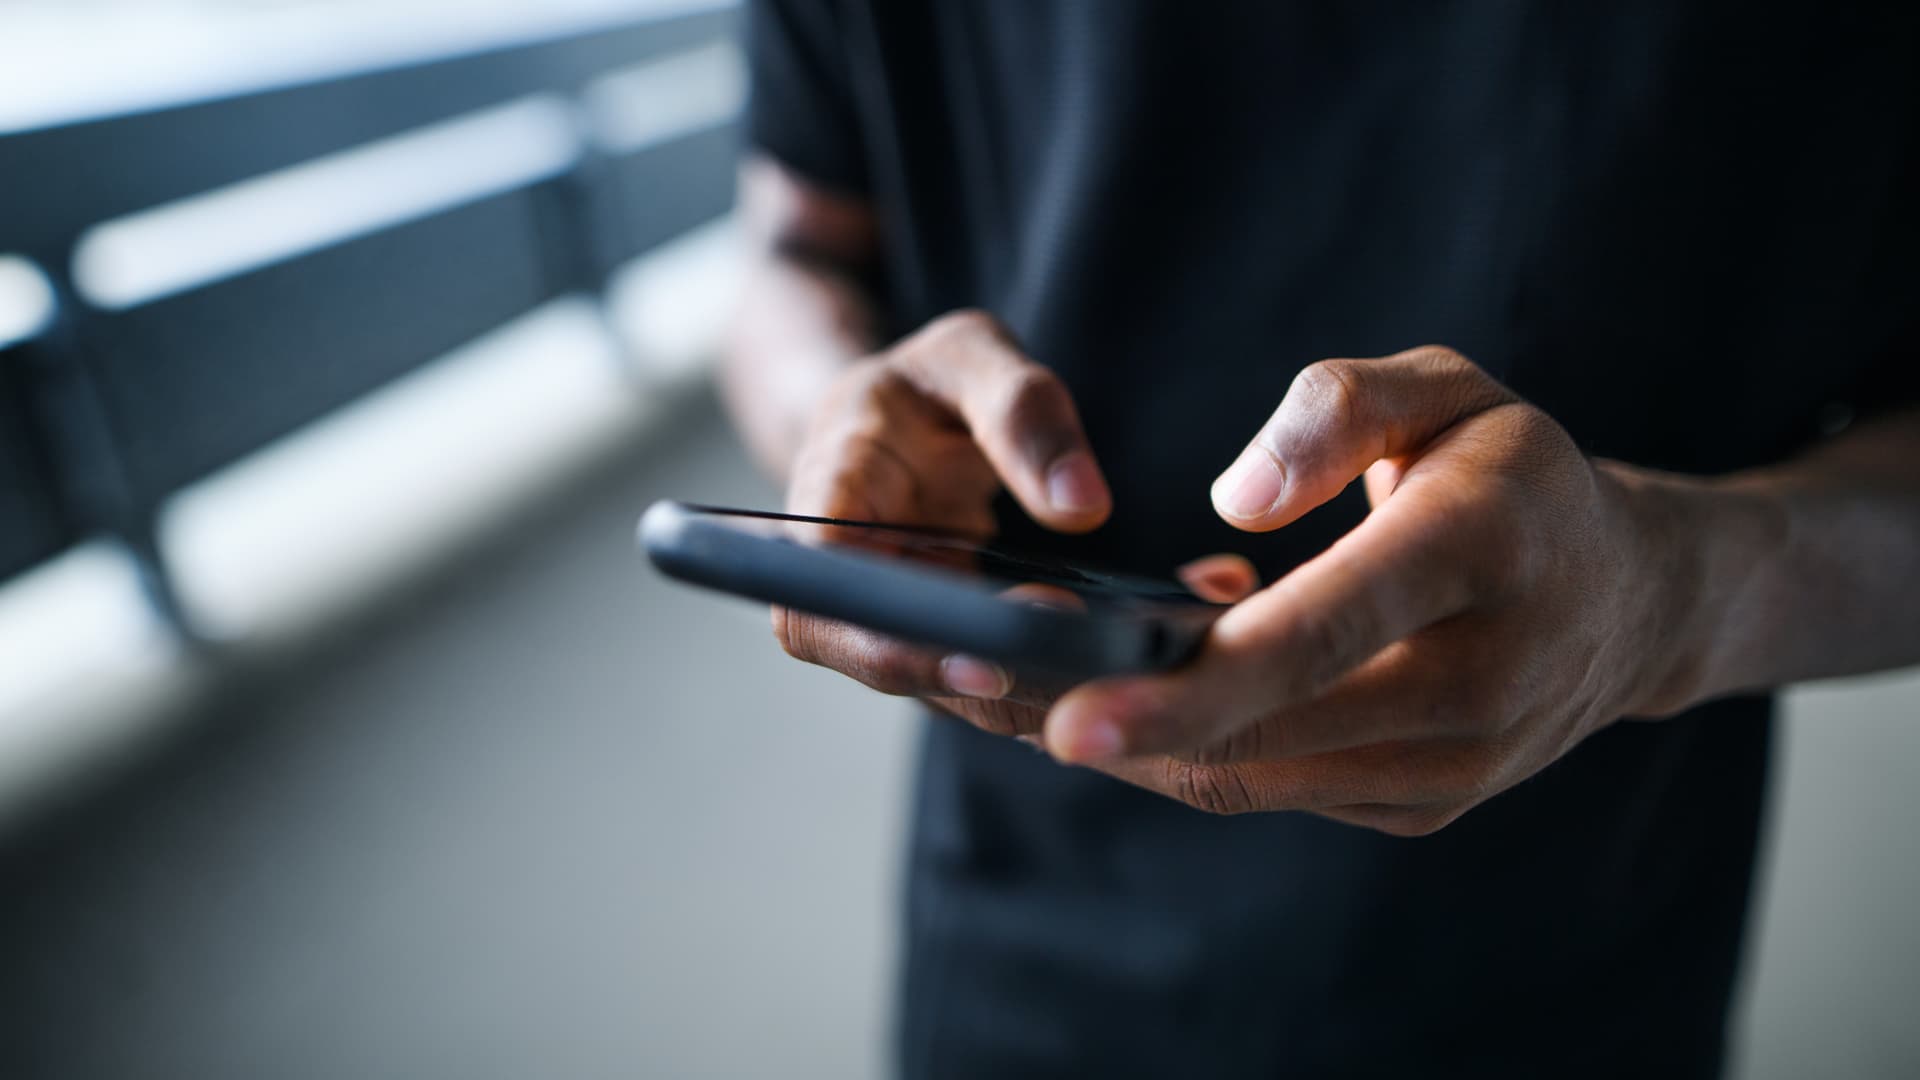 That simple 'hi' text from a stranger could be the start of a scam that ends up costing you millions